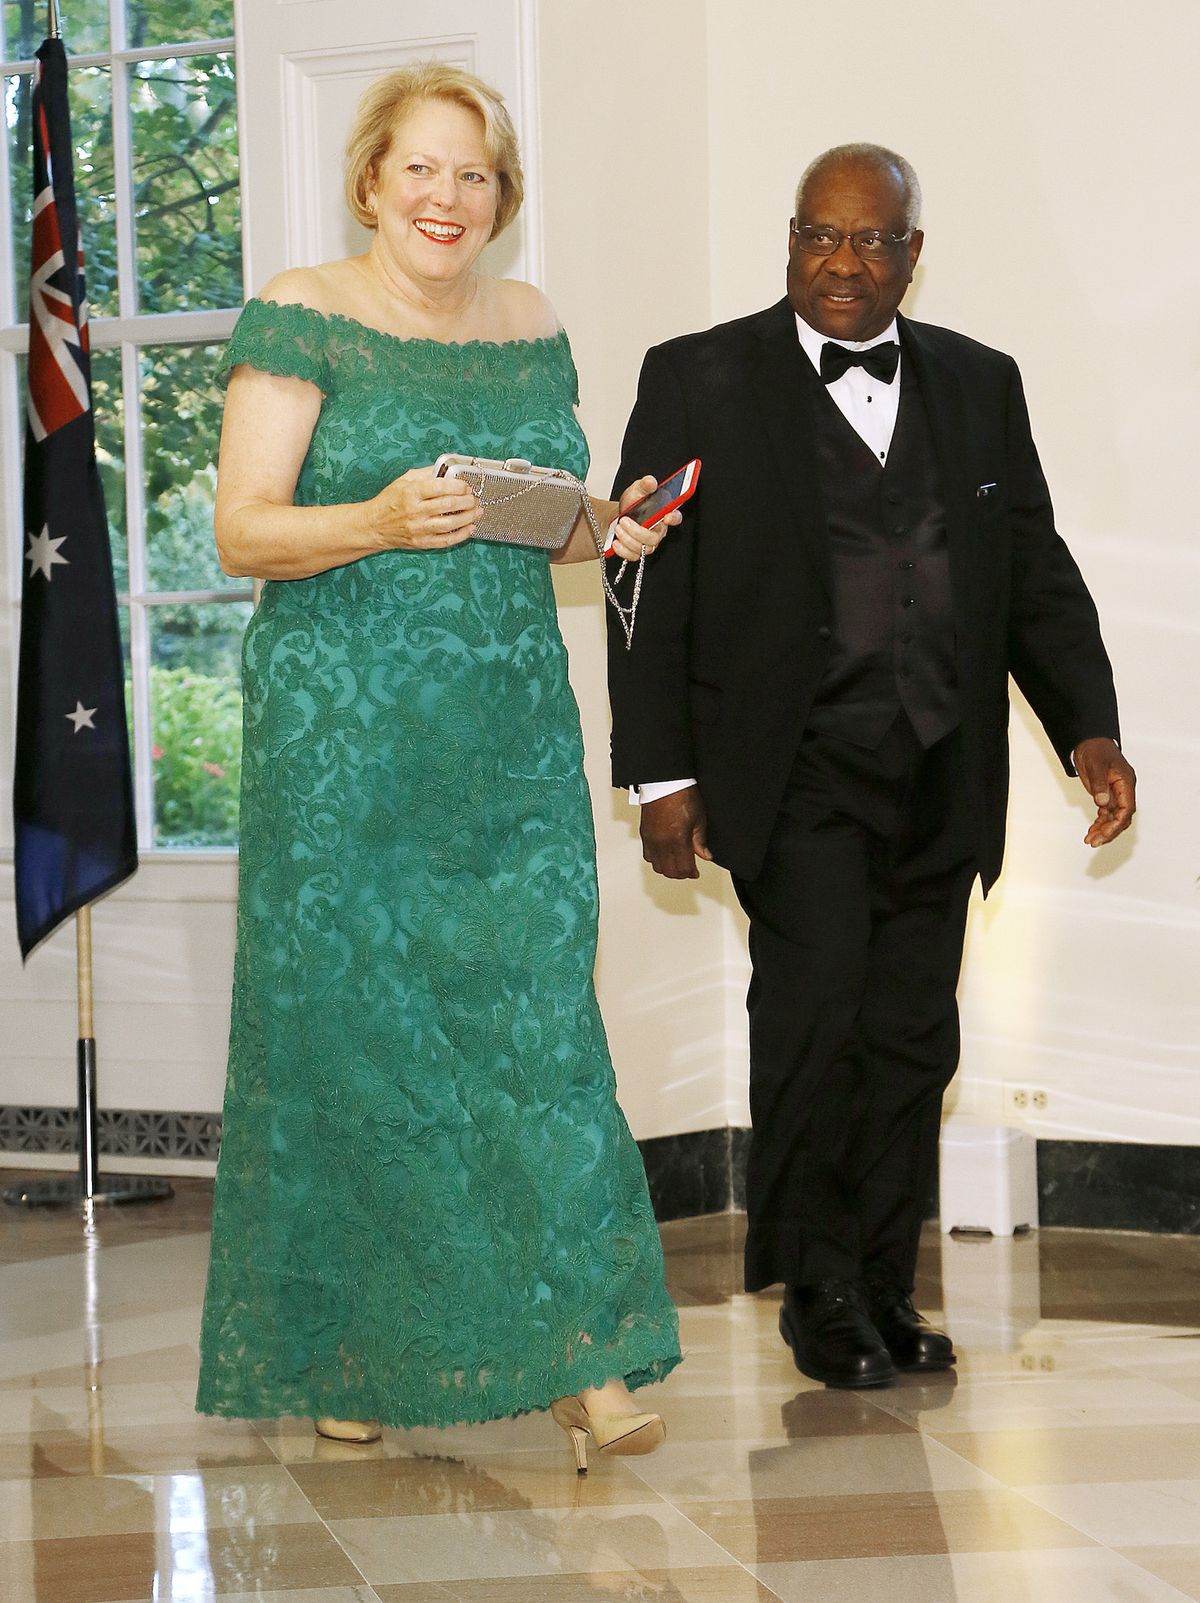 Guests Arrive For State Dinner At The White House Honoring Australian PM Morrison